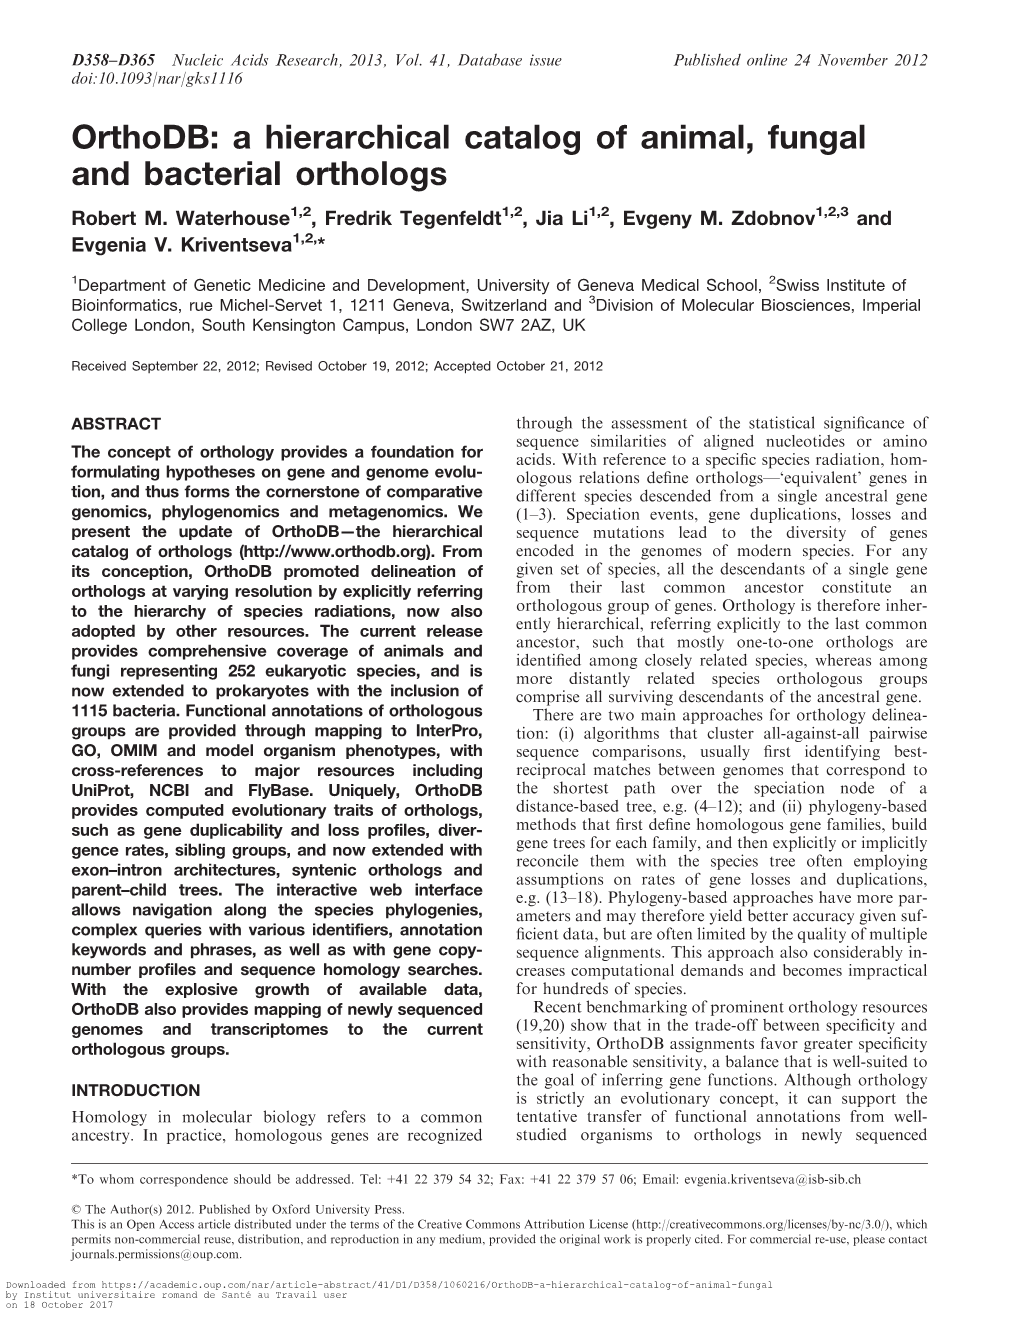 Orthodb: a Hierarchical Catalog of Animal, Fungal and Bacterial Orthologs Robert M